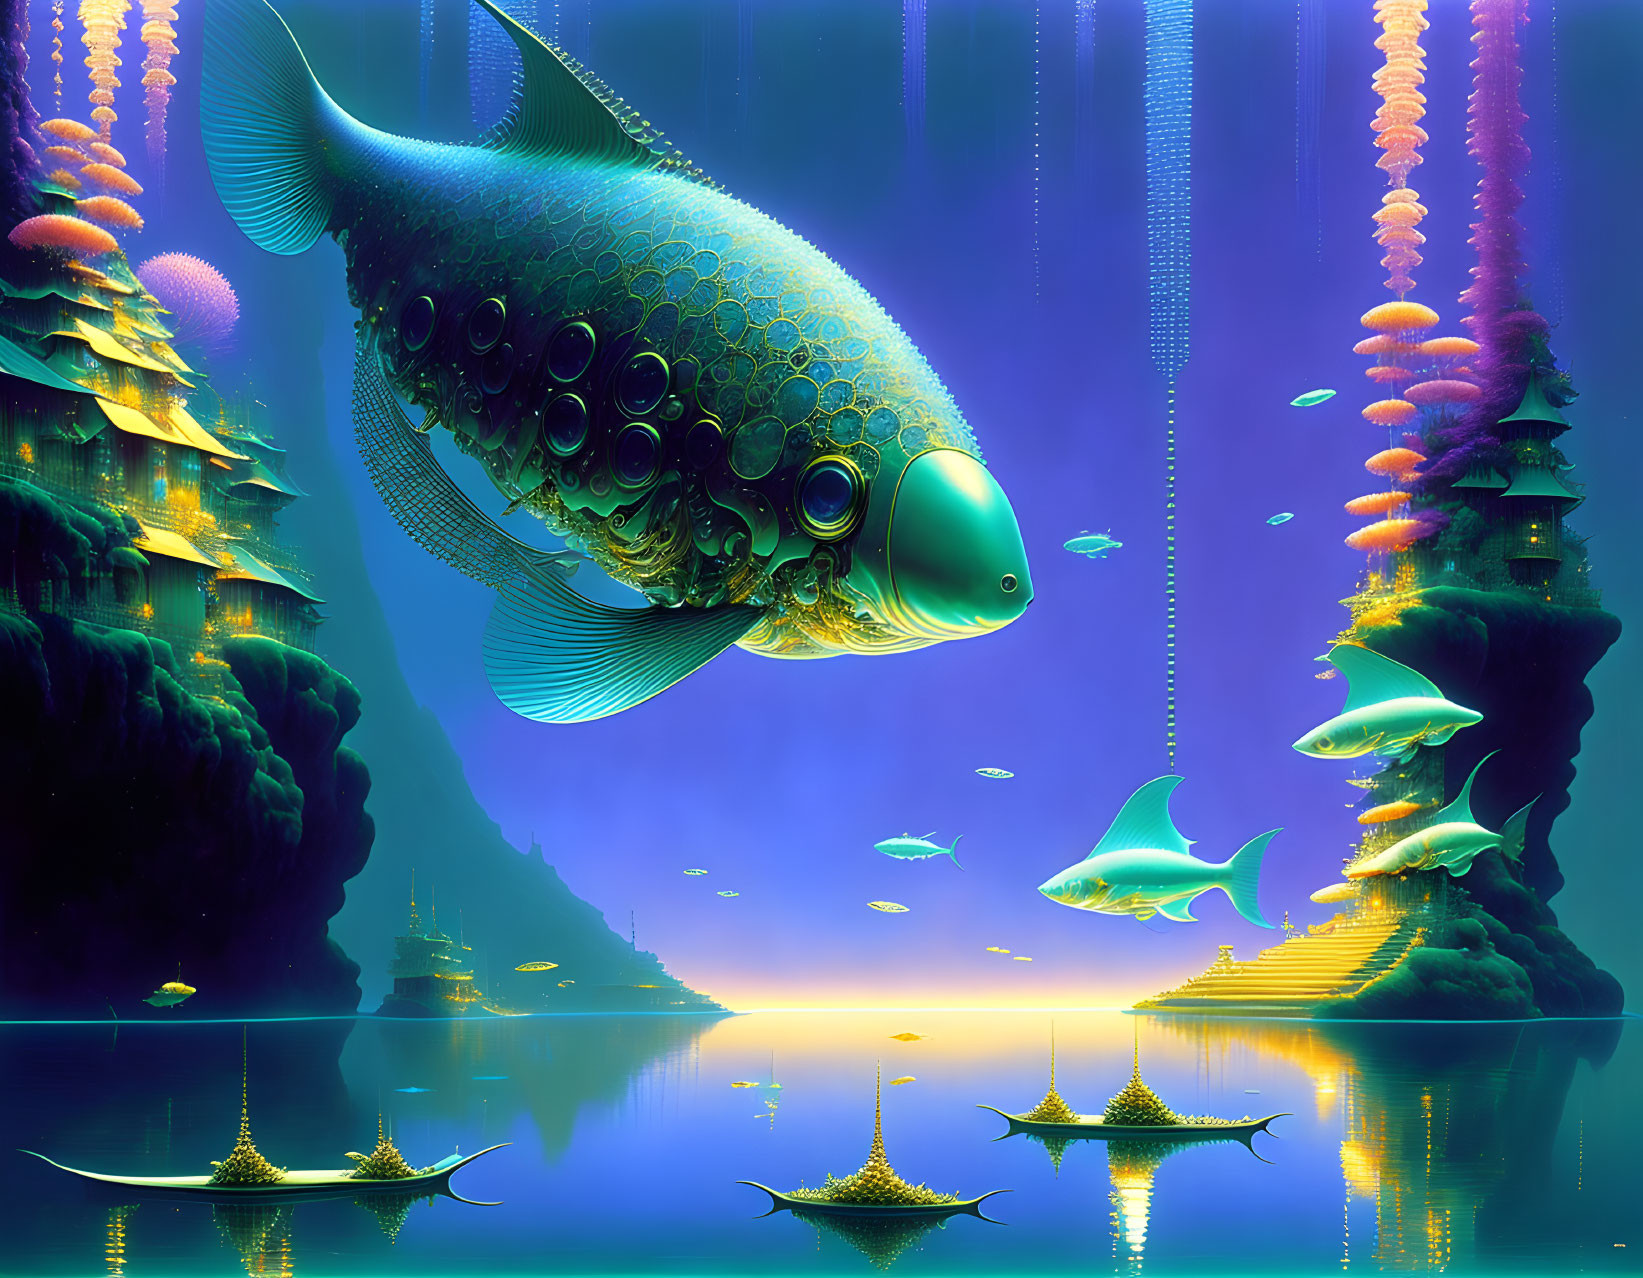 Colorful surreal underwater scene with stylized fish and boats on tranquil sea